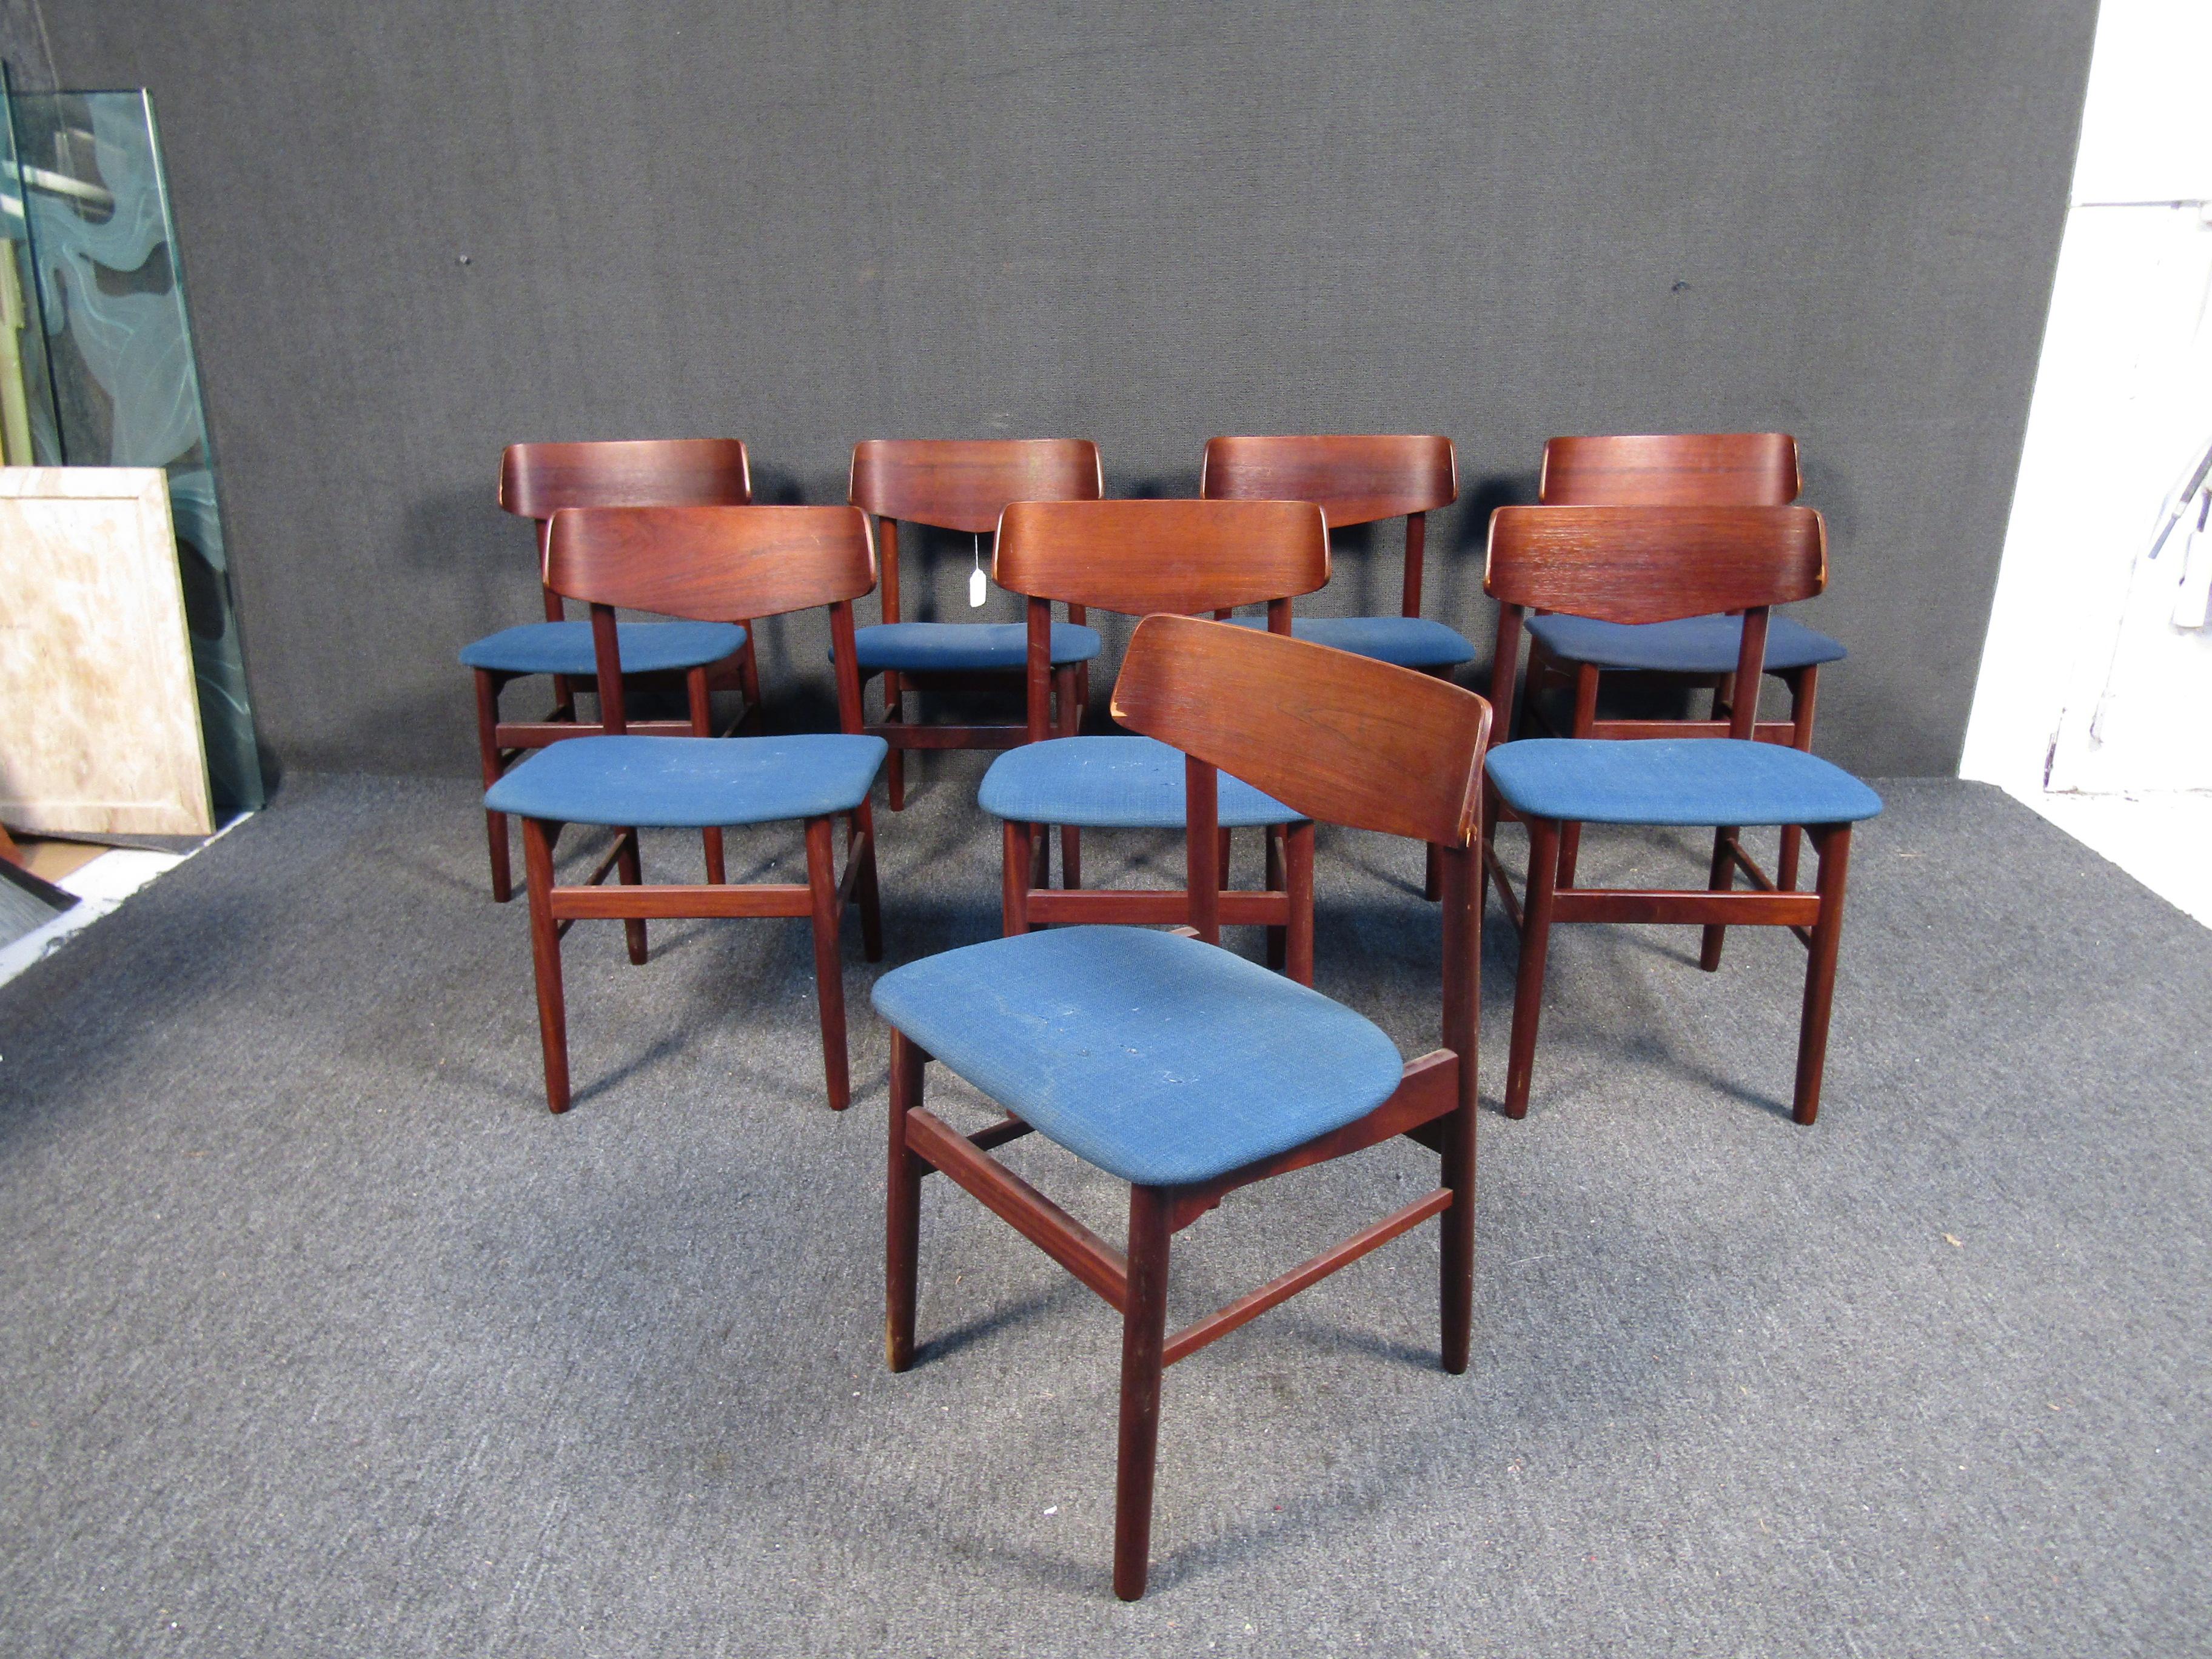 Stylish set of 8 Danish modern style dining chairs. These chairs feature contoured backrests with tapered legs and blue upholstered seats. These chairs would make a great addition to any modern interior's decor. 

Please confirm item location with